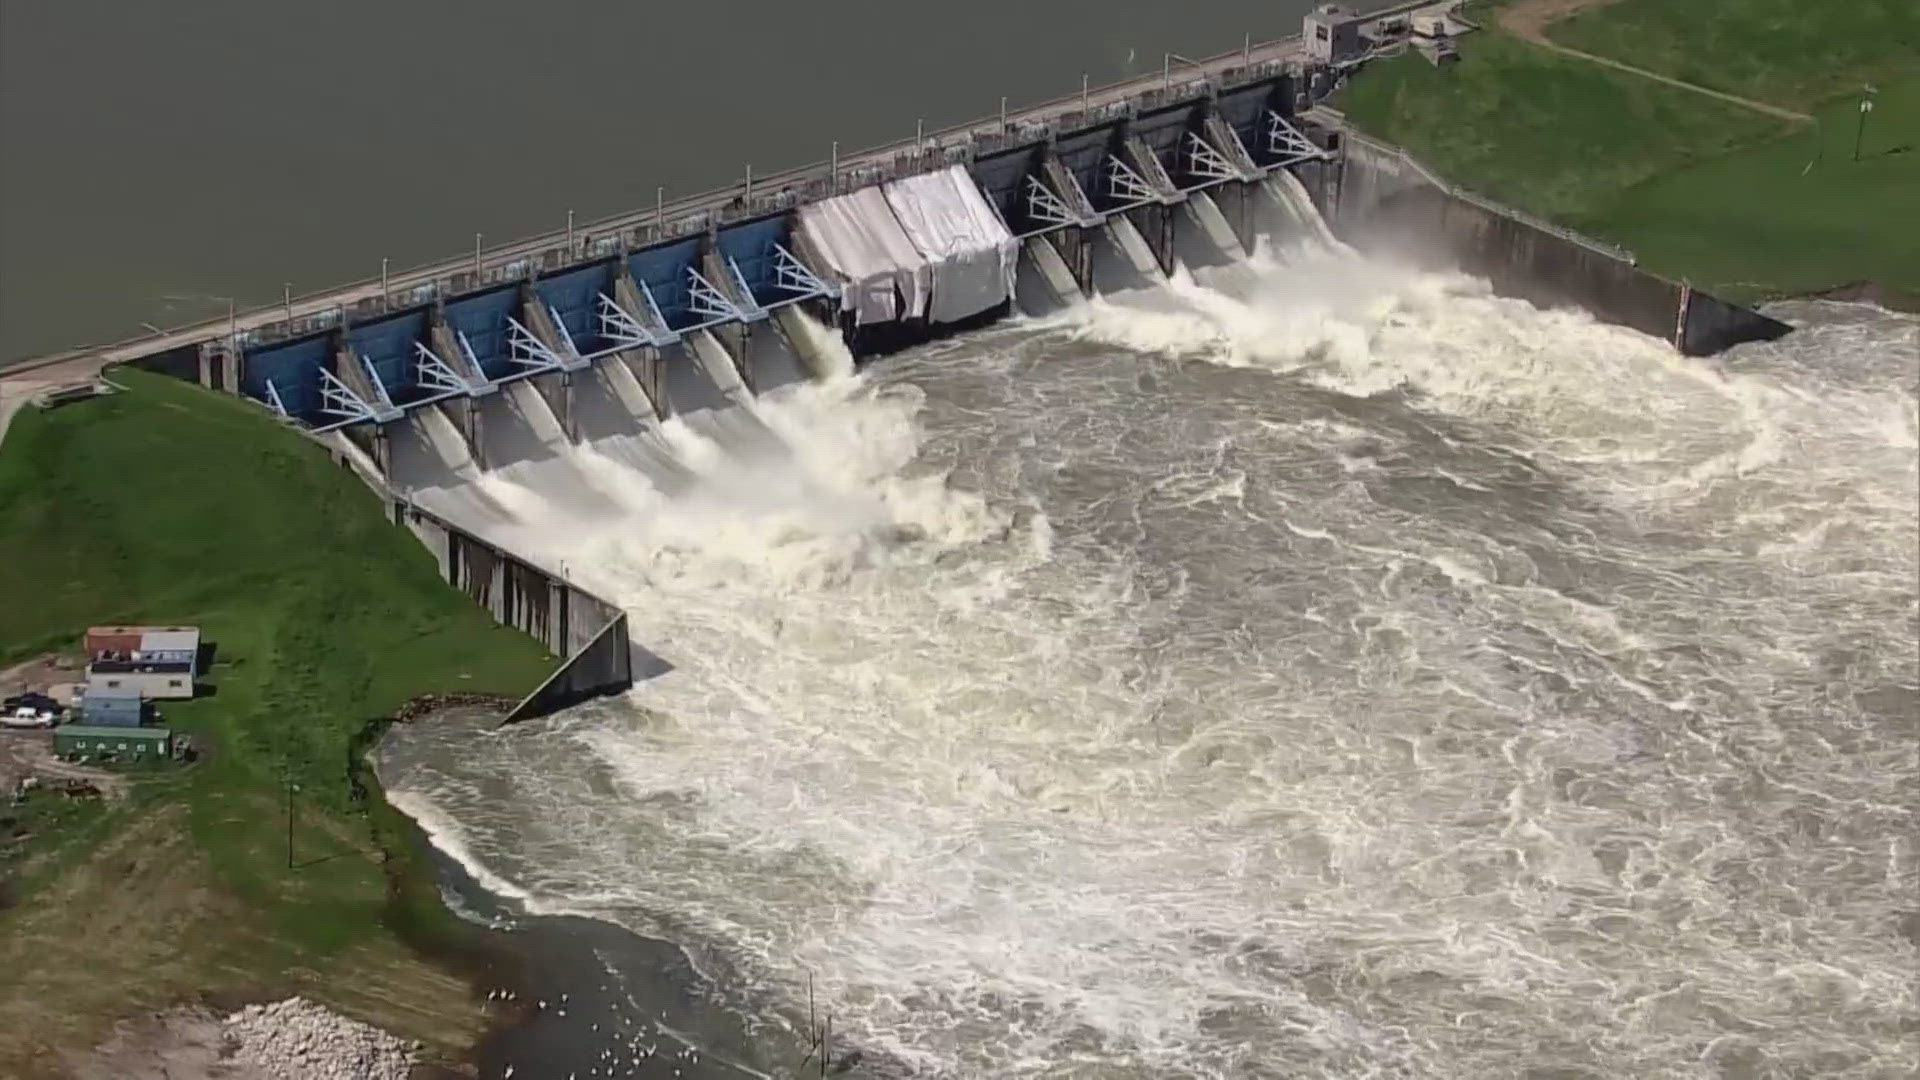 The spillway was damaged by recent flooding. There is no immediate danger according to the Trinity River Authority.